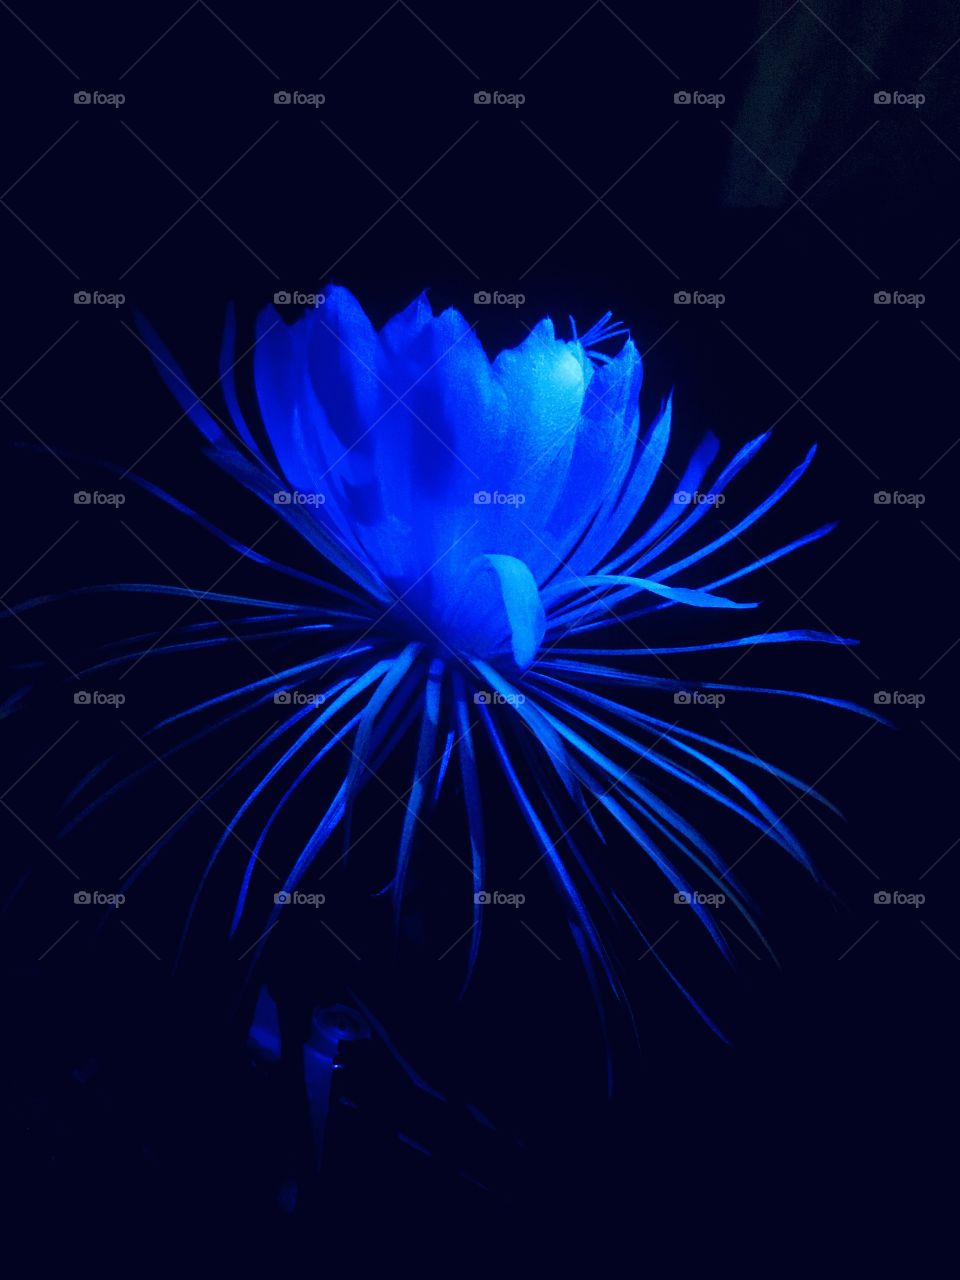 Fully opened “Queen of the Night” flower from a Night-Blooming Cereus cactus, illuminated by blue lighting in a dark room. 